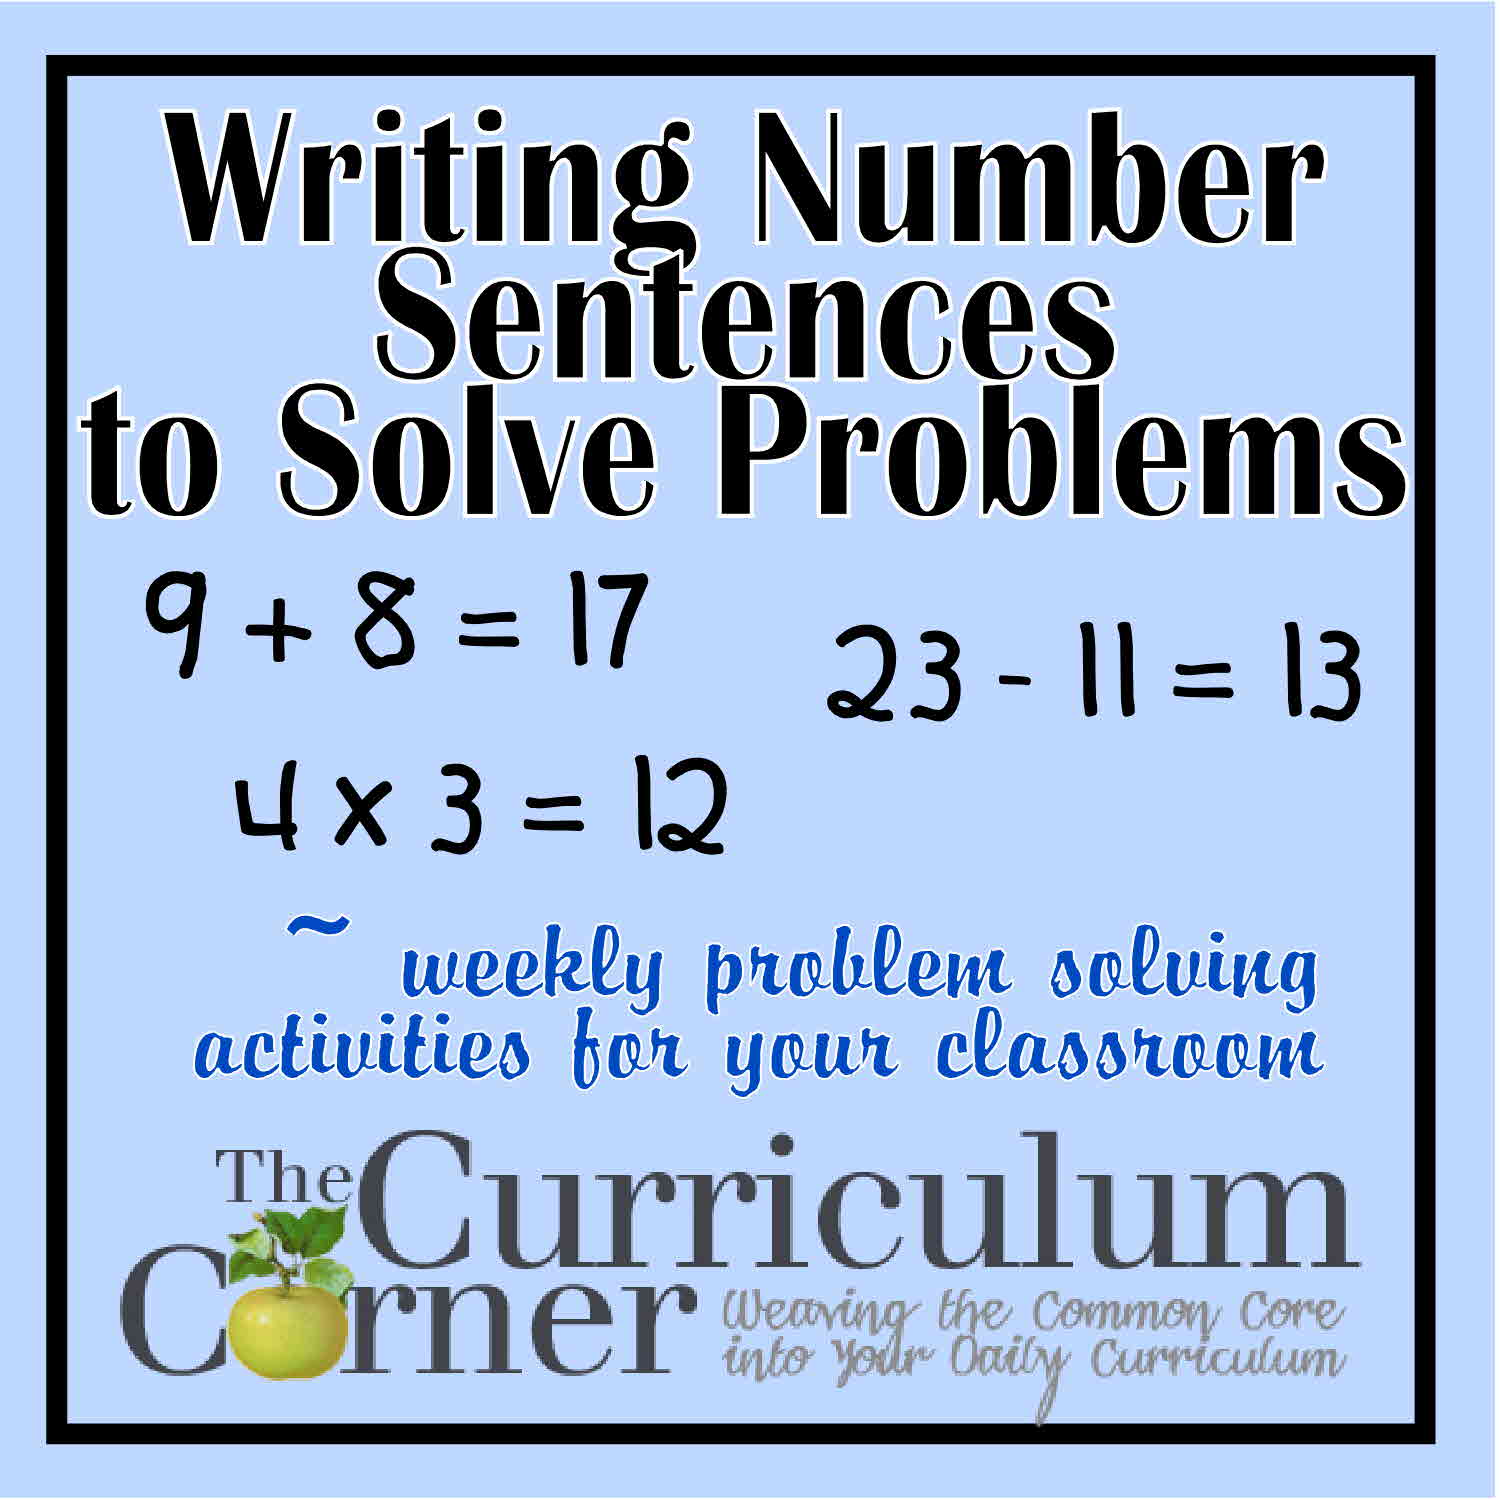 writing-number-sentences-to-solve-problems